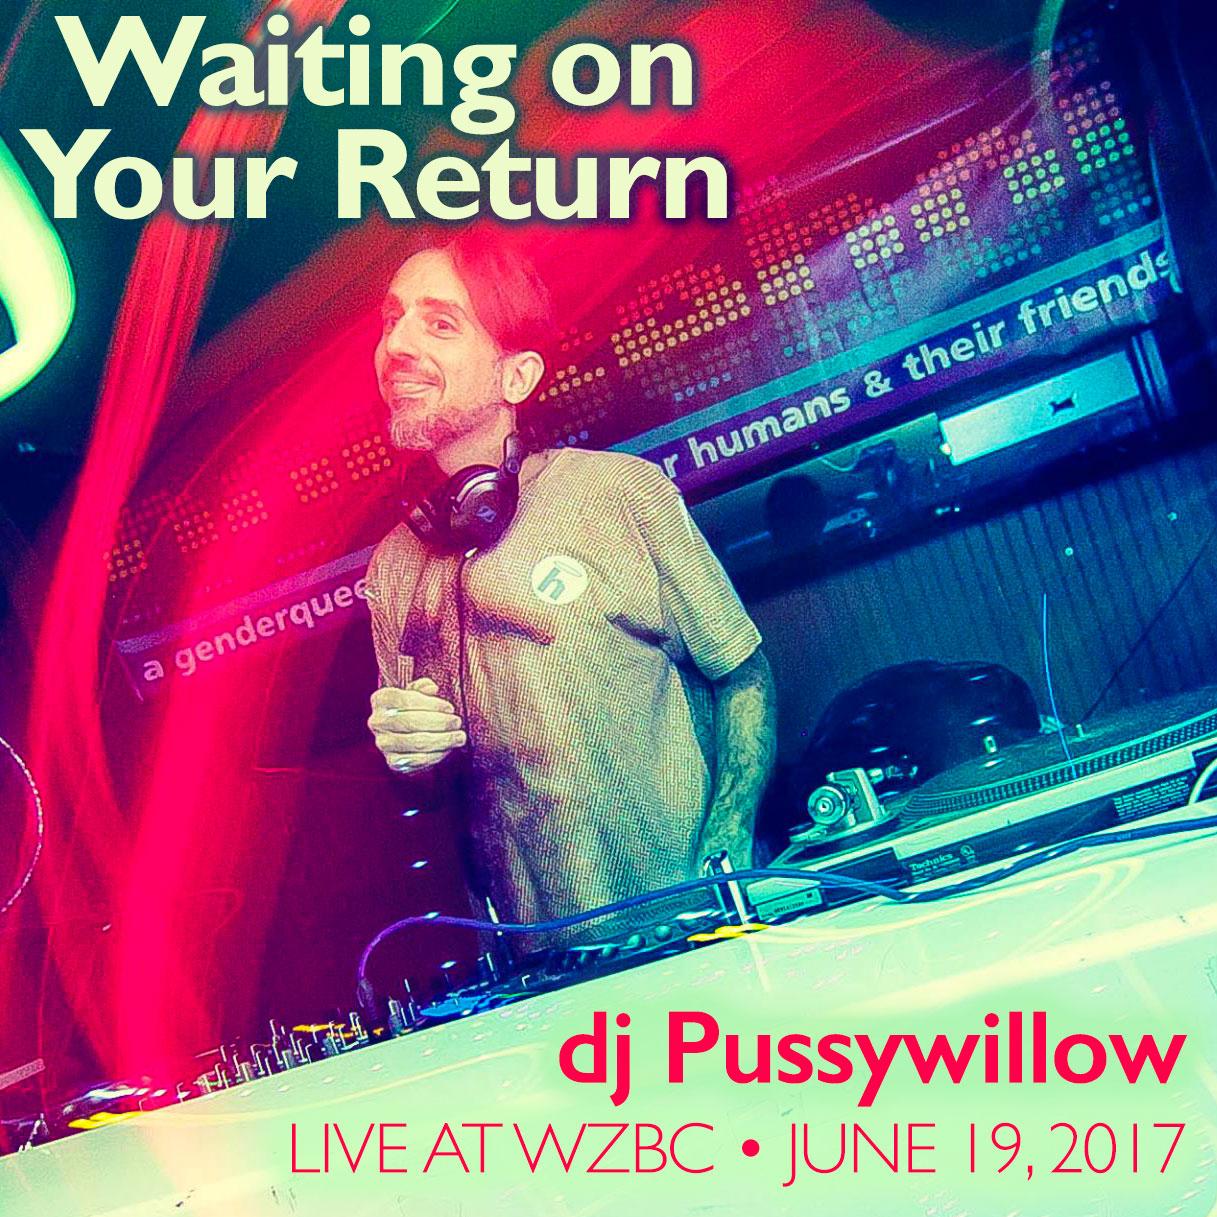 Waiting on Your Return - Live on WZBC, June 19, 2017